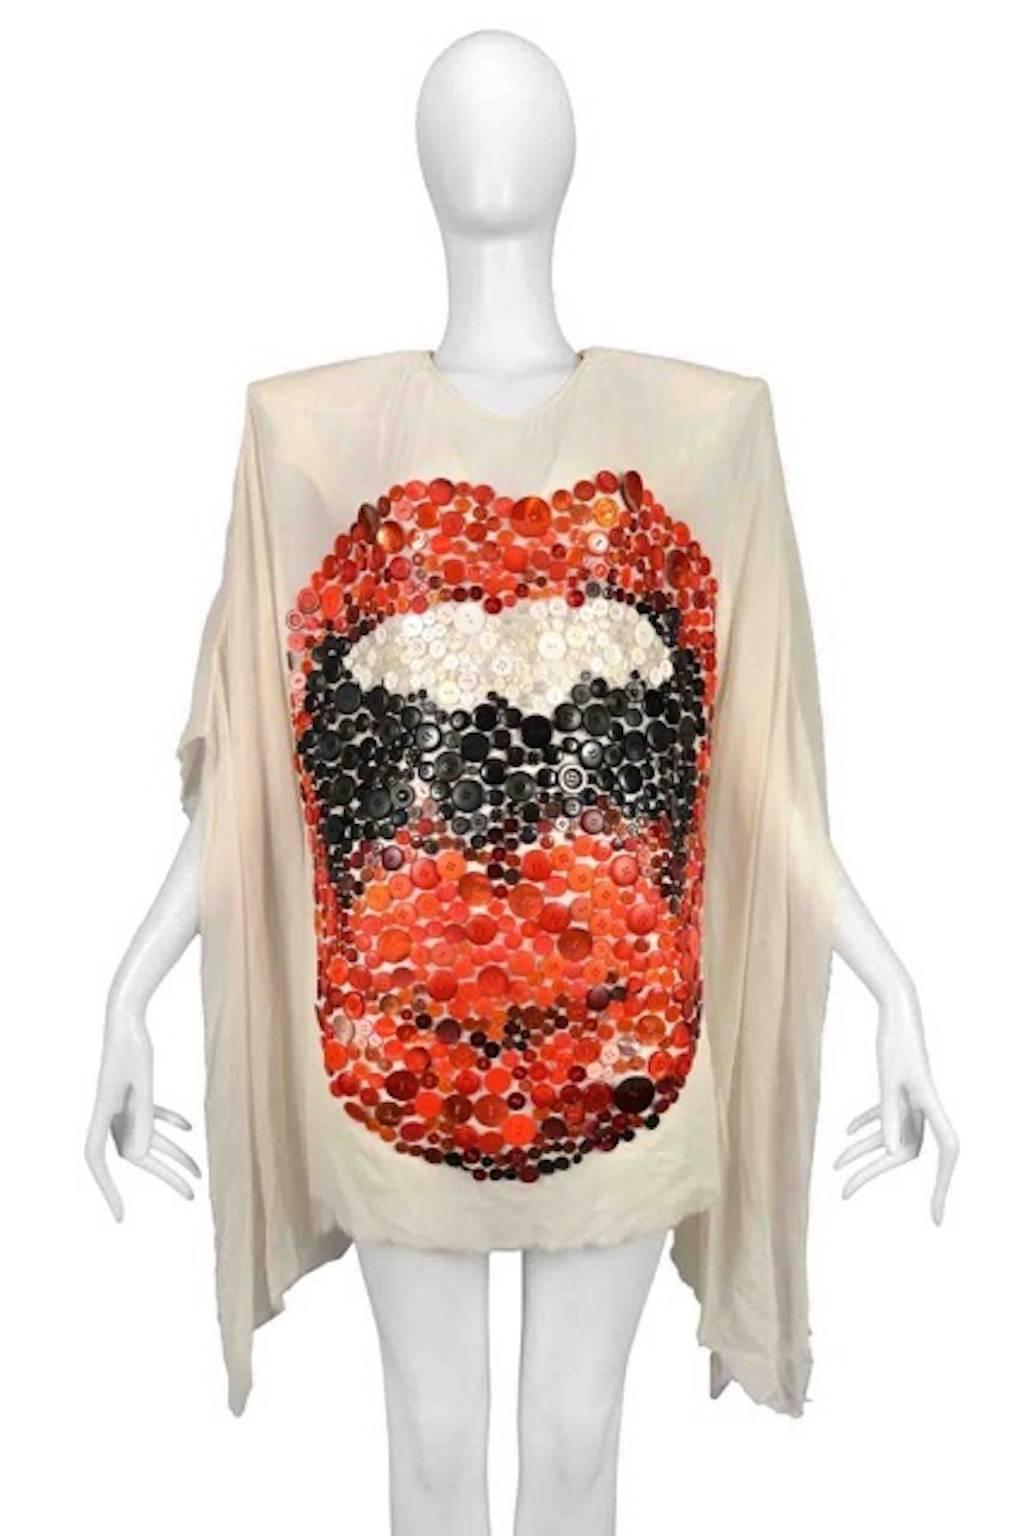 Vintage Maison Martin Margiela Couture Artisanal Button Mouth Tunic. Vintage mother-of-pearl, metal and plastic buttons are embroidered on silk chiffon to draw a mouth. 25 hours to produce. Runway piece from the Spring / Summer 2008 Couture